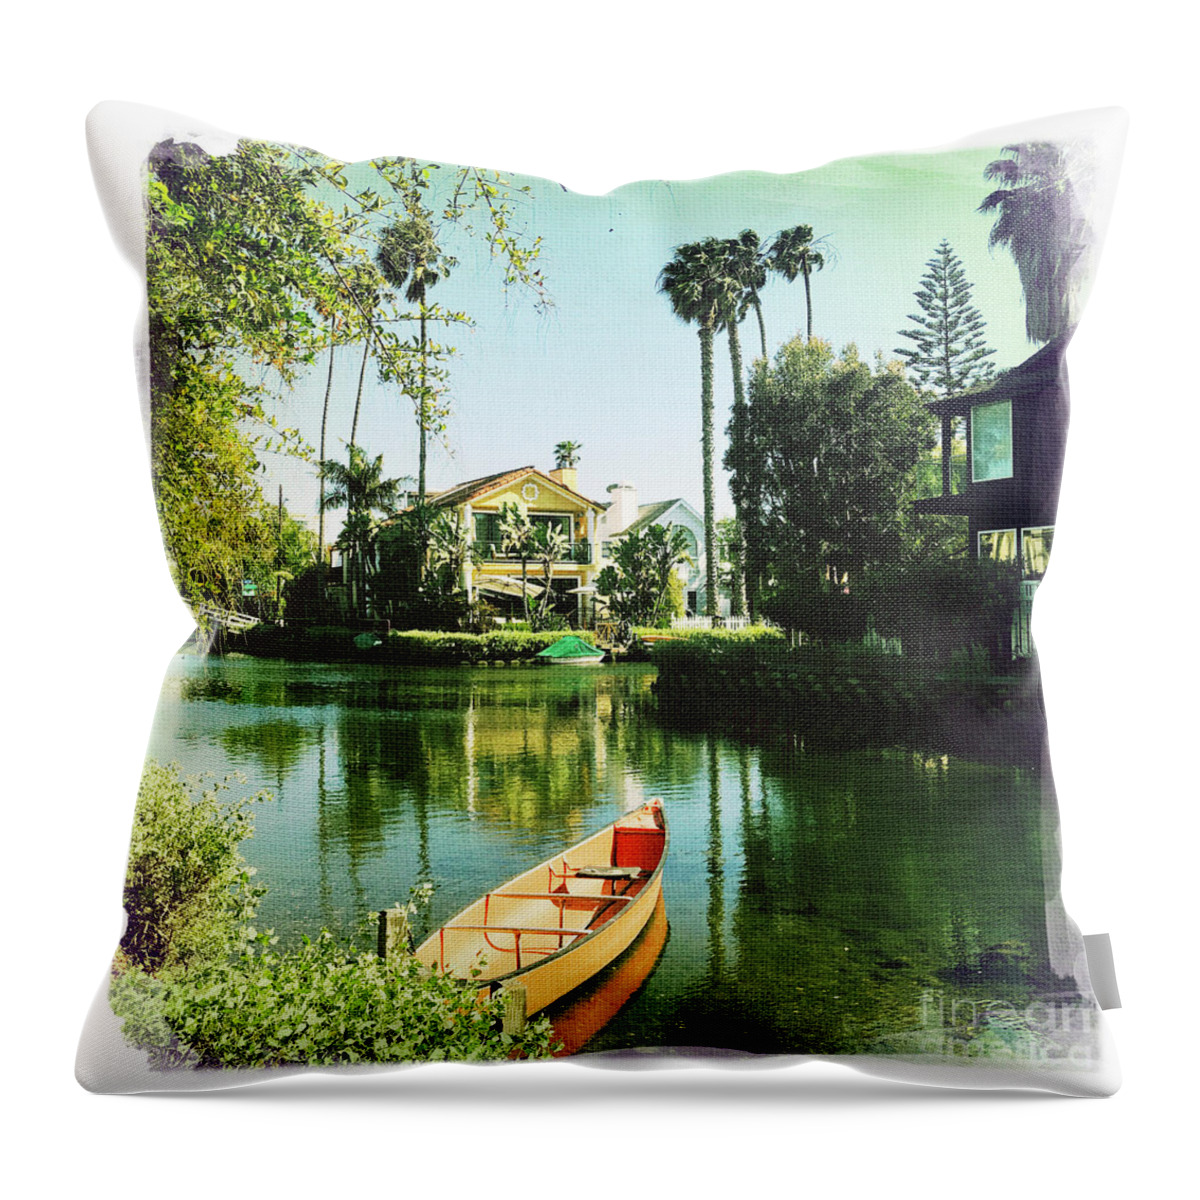 Venice Canals Kayak Throw Pillow featuring the photograph Venice Canals Kayak by Nina Prommer